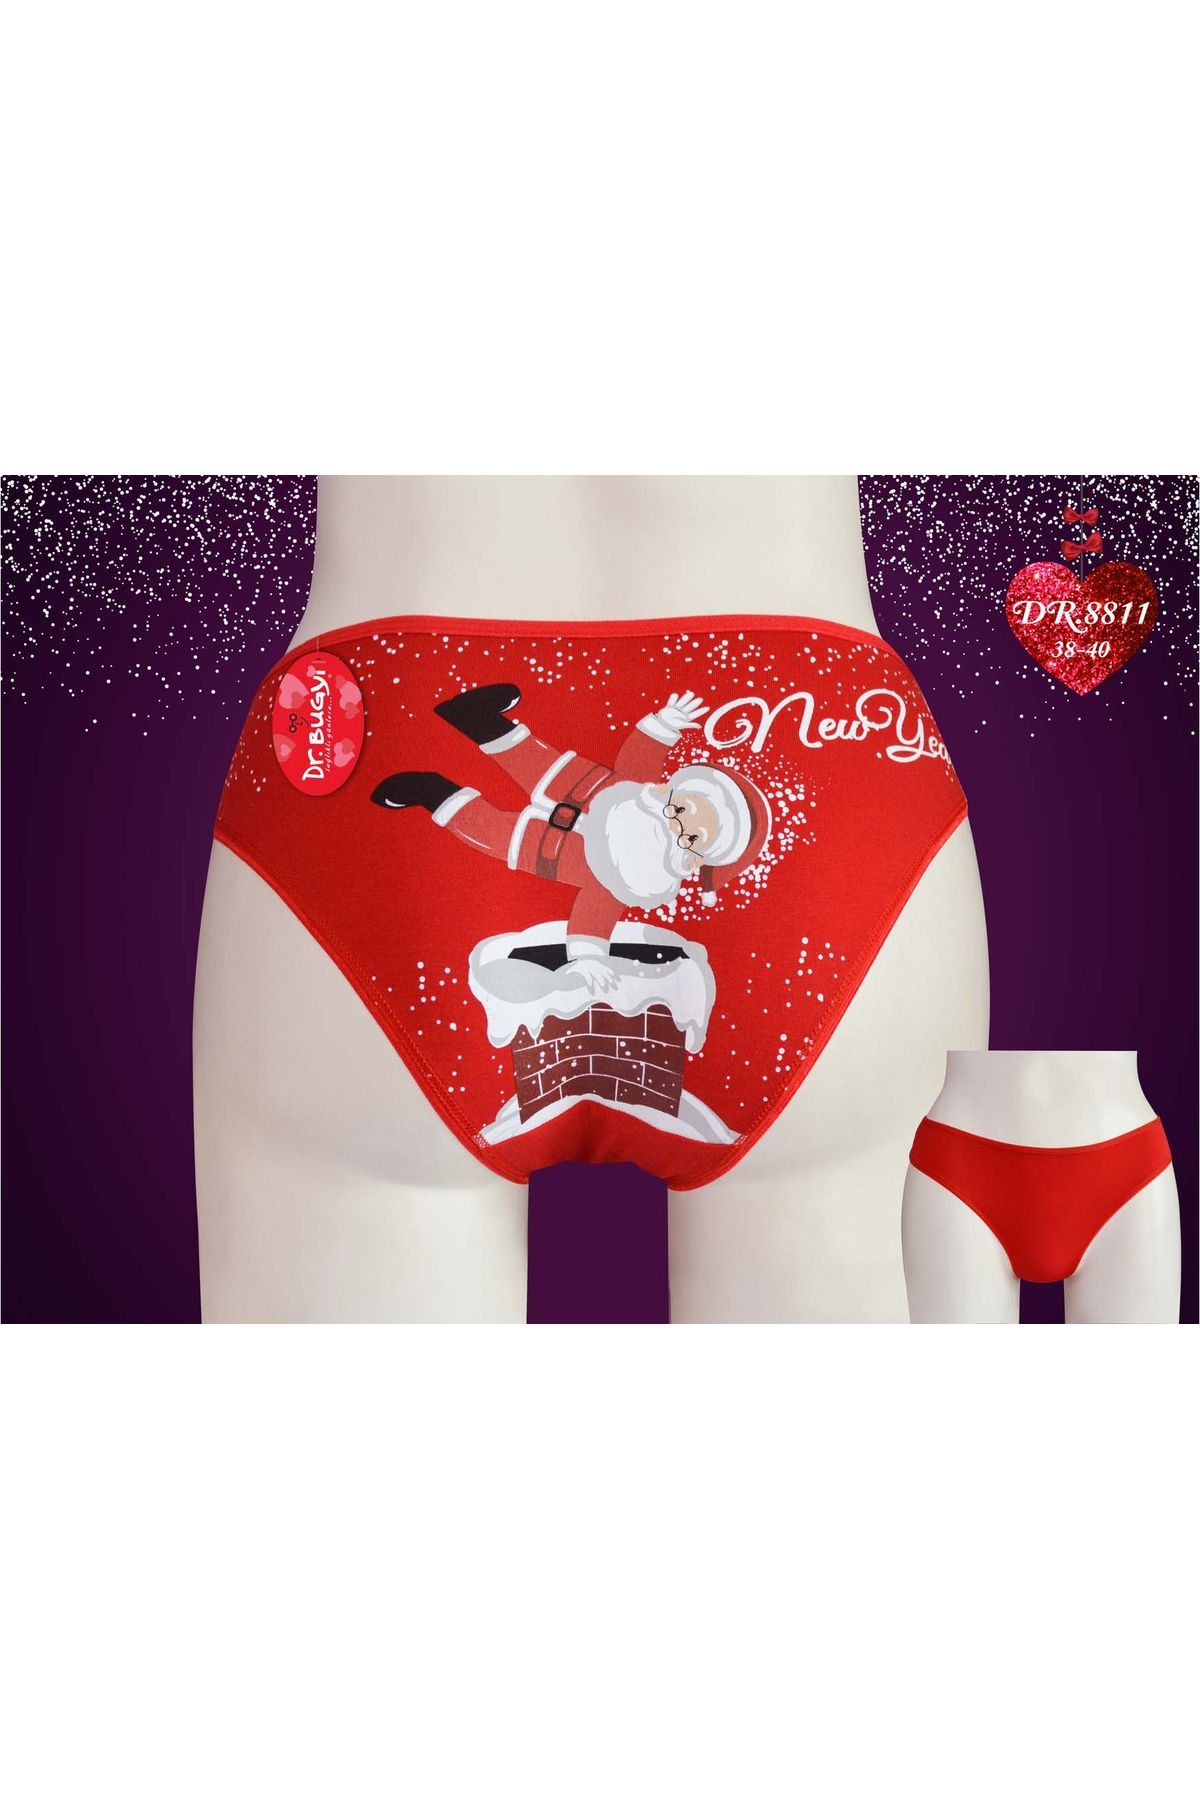 Papatya DR.BUGGY 8811 WOMEN'S CHRISTMAS NEW YEAR BACK PRINTED RED PANTIES  (38-40) STANDARD SIZE